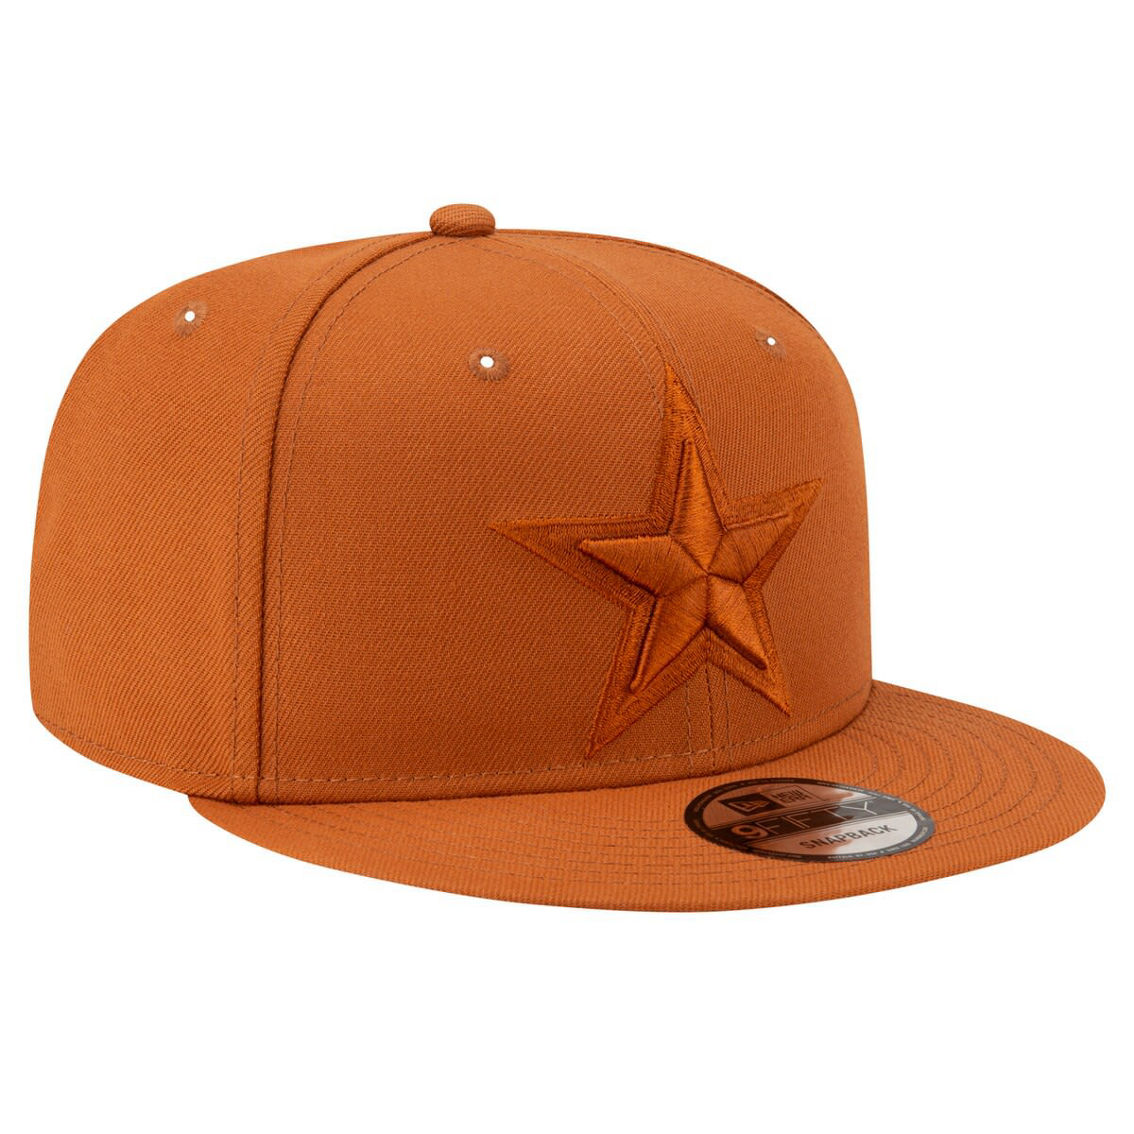 New Era Youth Brown Dallas Cowboys Color Pack 9FIFTY Snapback Hat - Image 4 of 4